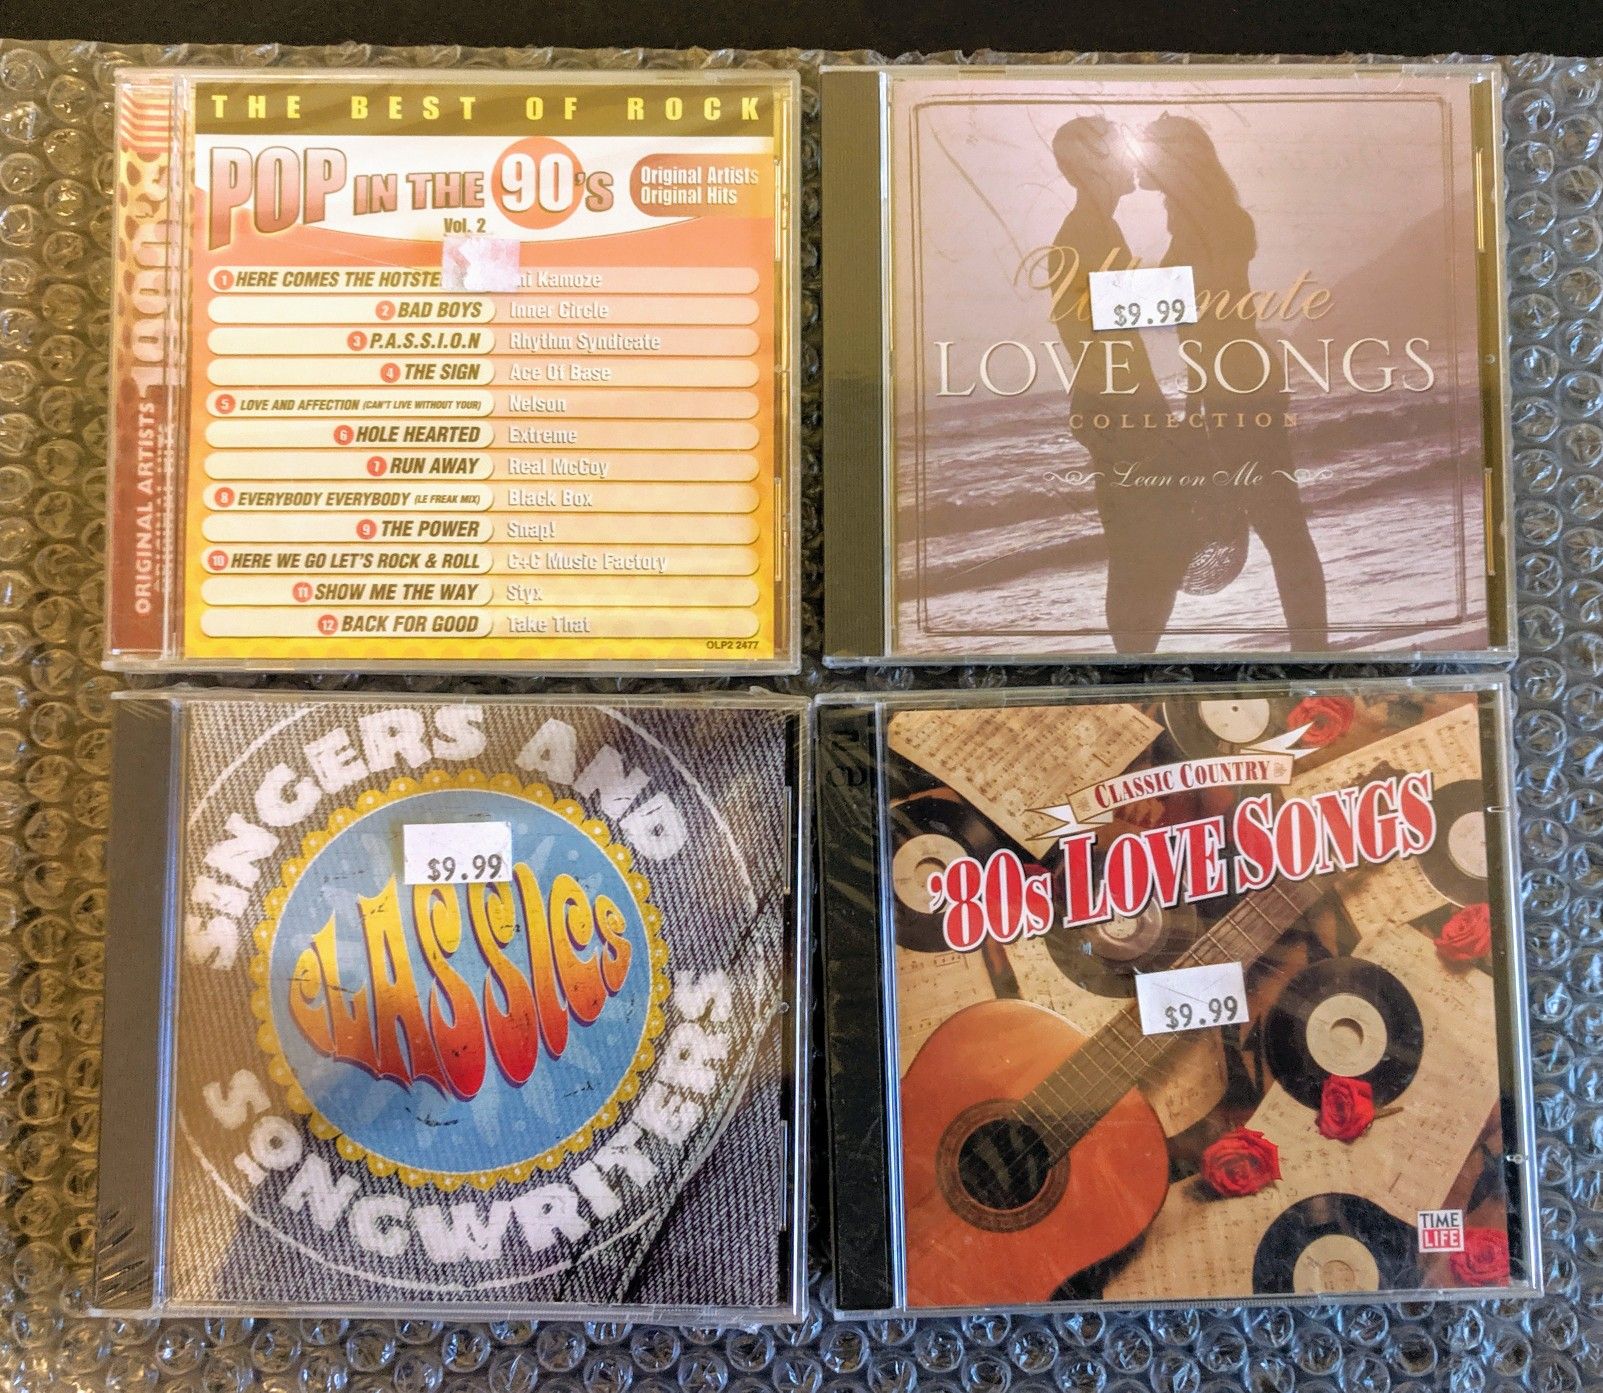 (4XCD) Pop in the 90s, Ultimate Love Songs, Classic Country 80s Love Songs, Singer Songwriter Classics (New/Sealed) Time Life Music